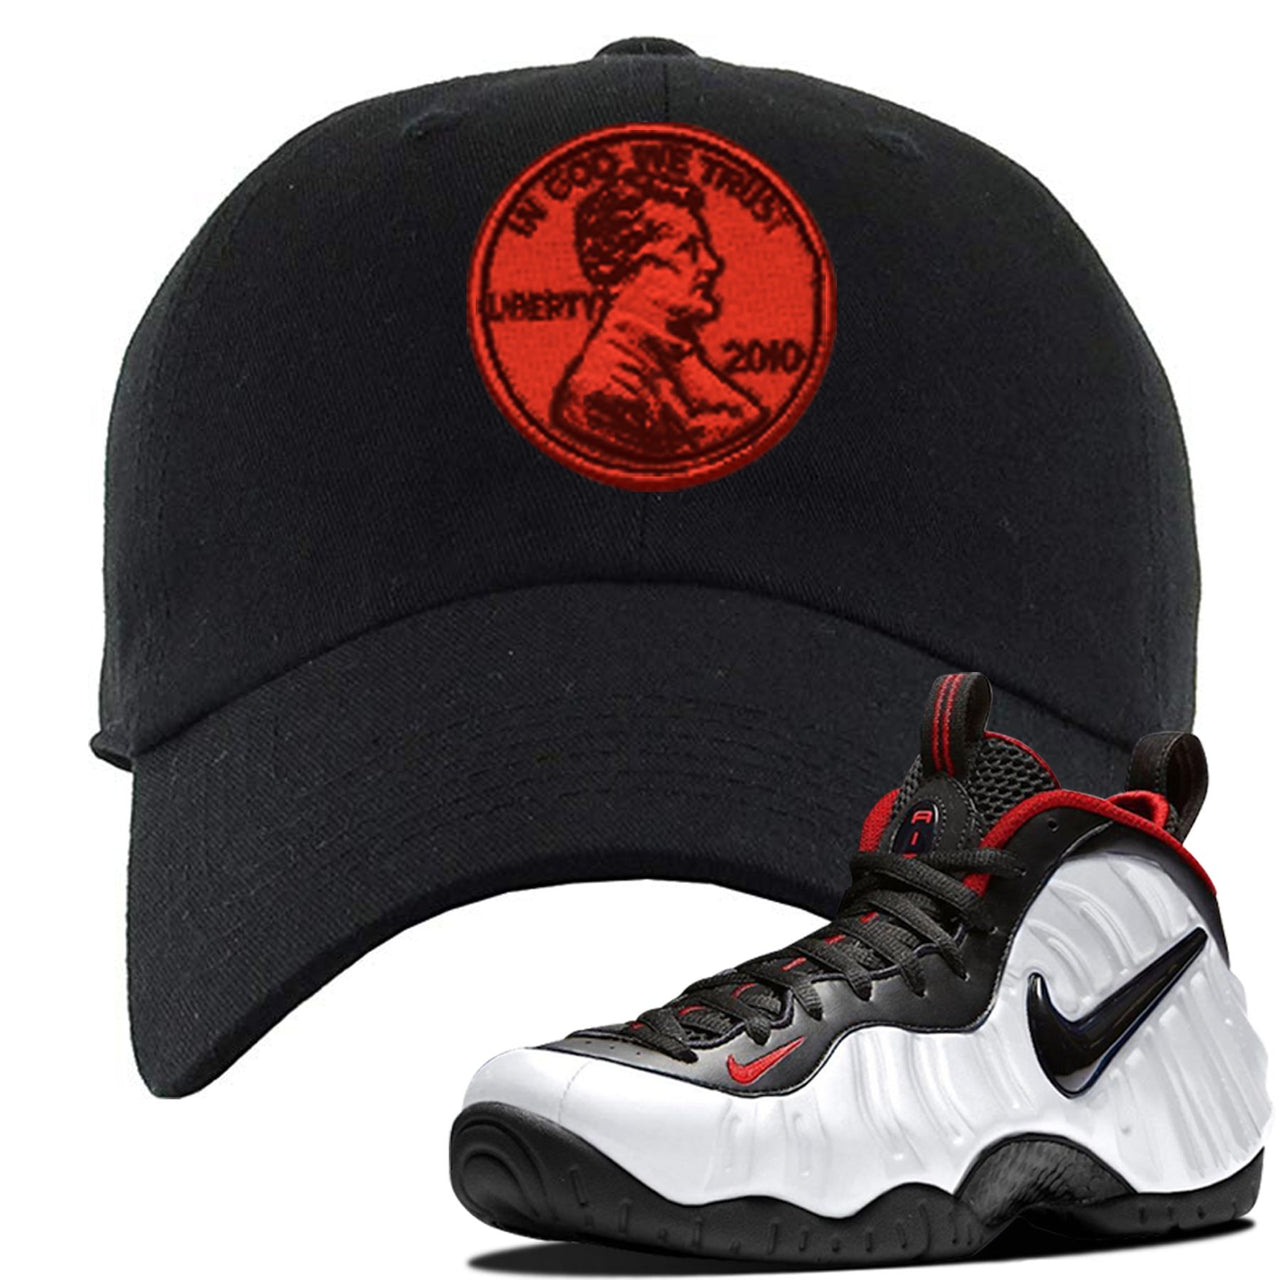 Foamposite Pro White Black University Red Sneaker Black Dad Hat | Hat to match Nike Air Foamposite Pro White Black University Red Shoes | Penny